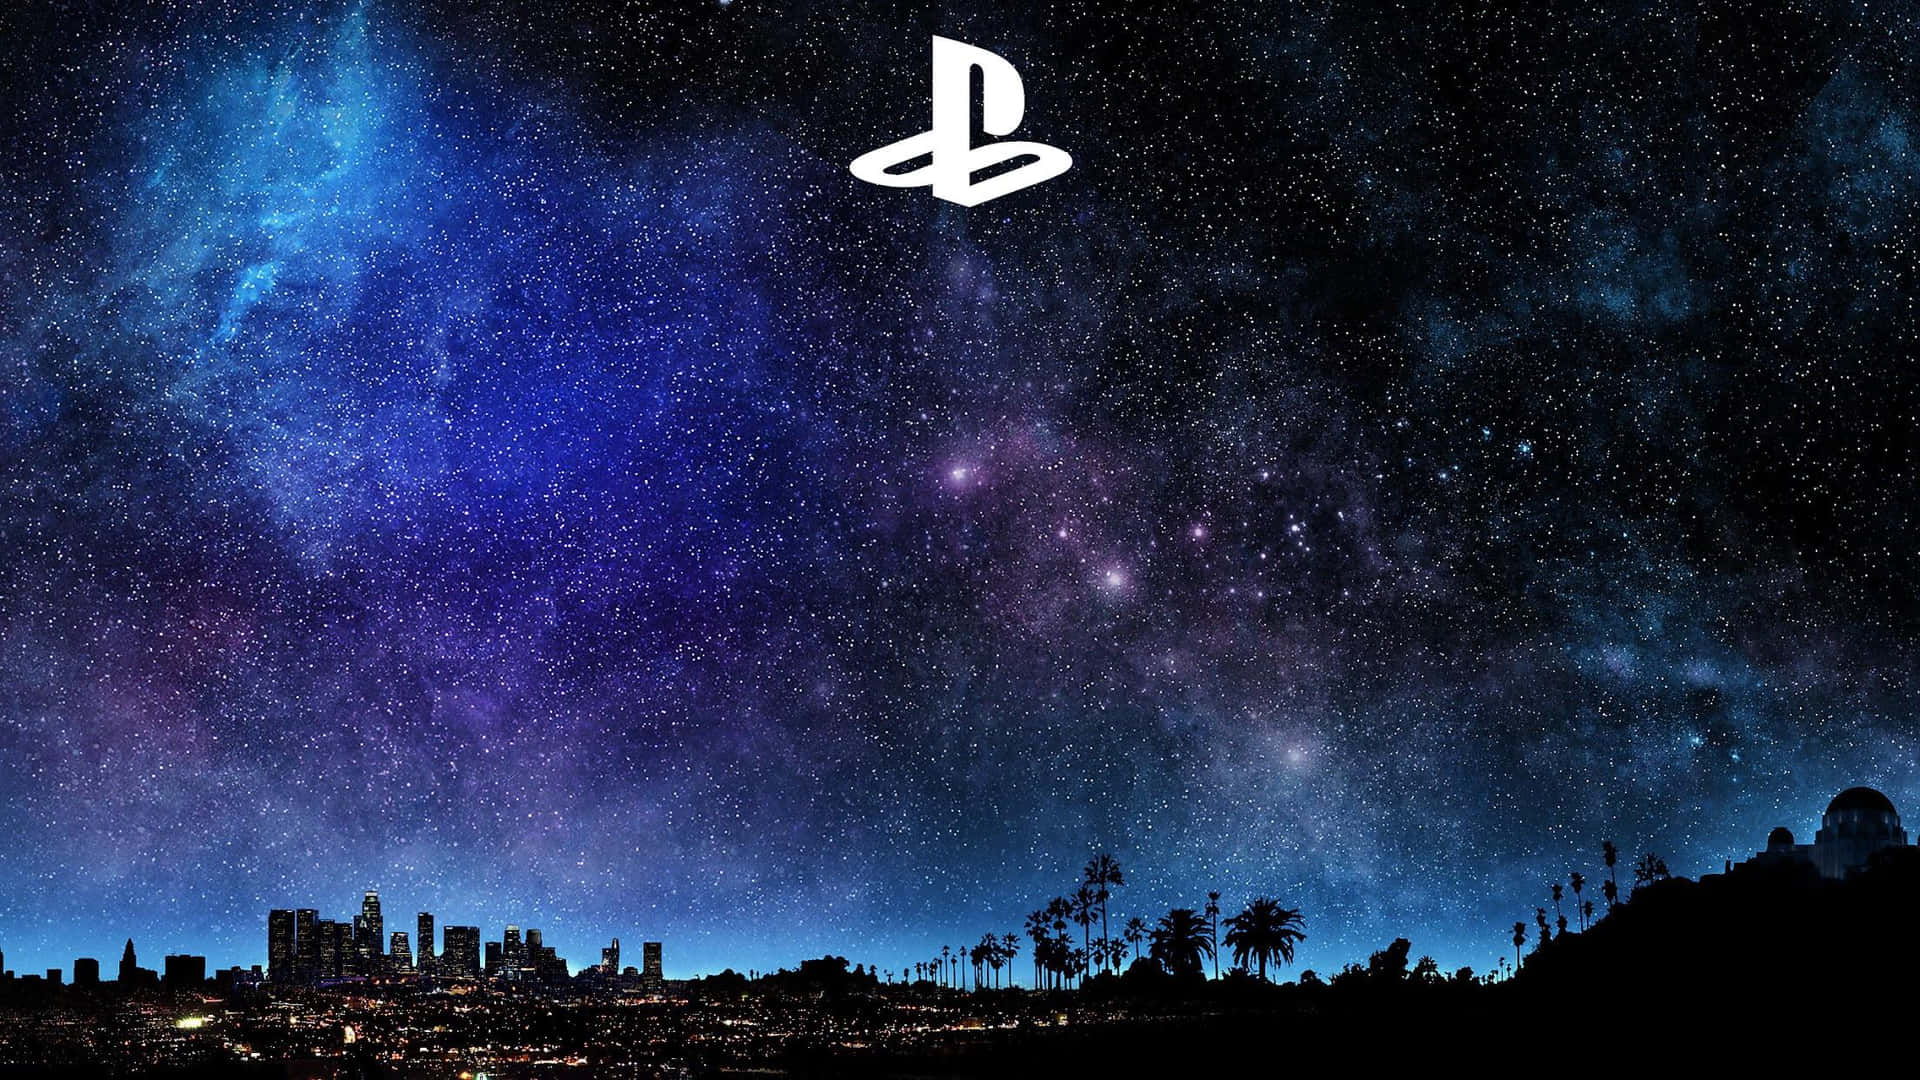 "Step Into a World of Gaming with PlayStation"